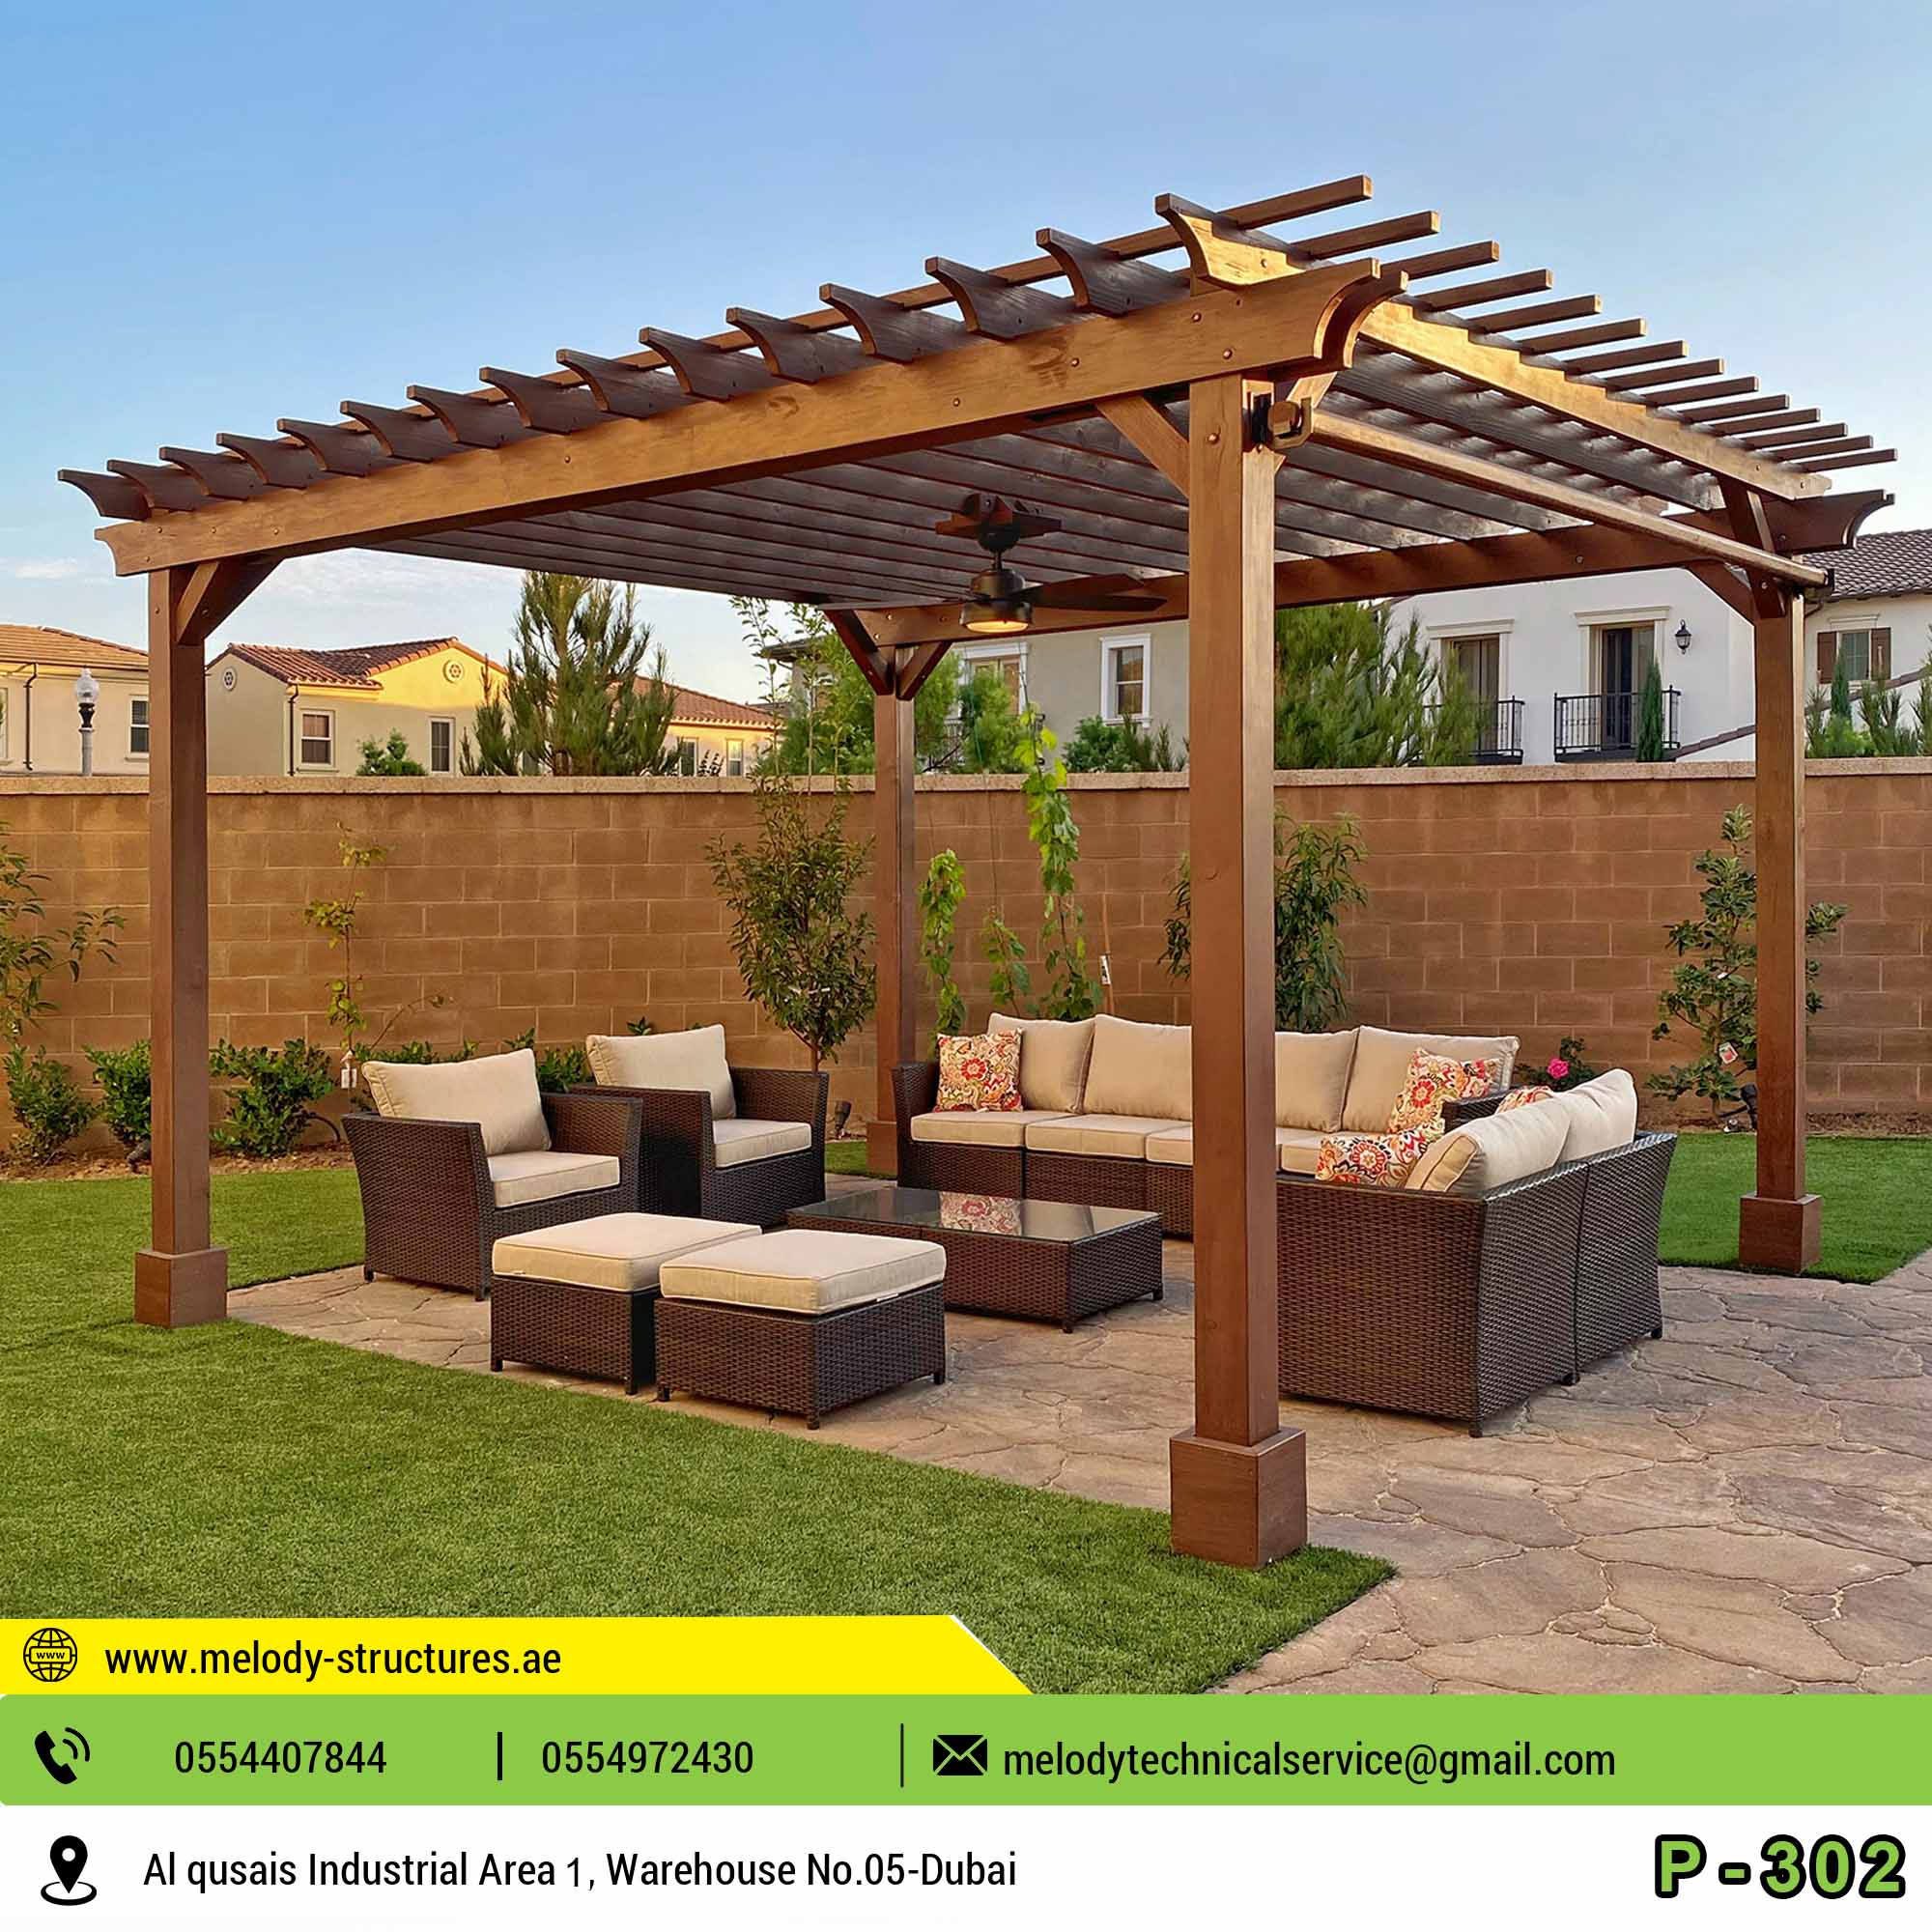 Buy Wooden Pergola In Dubai At Melody Structures